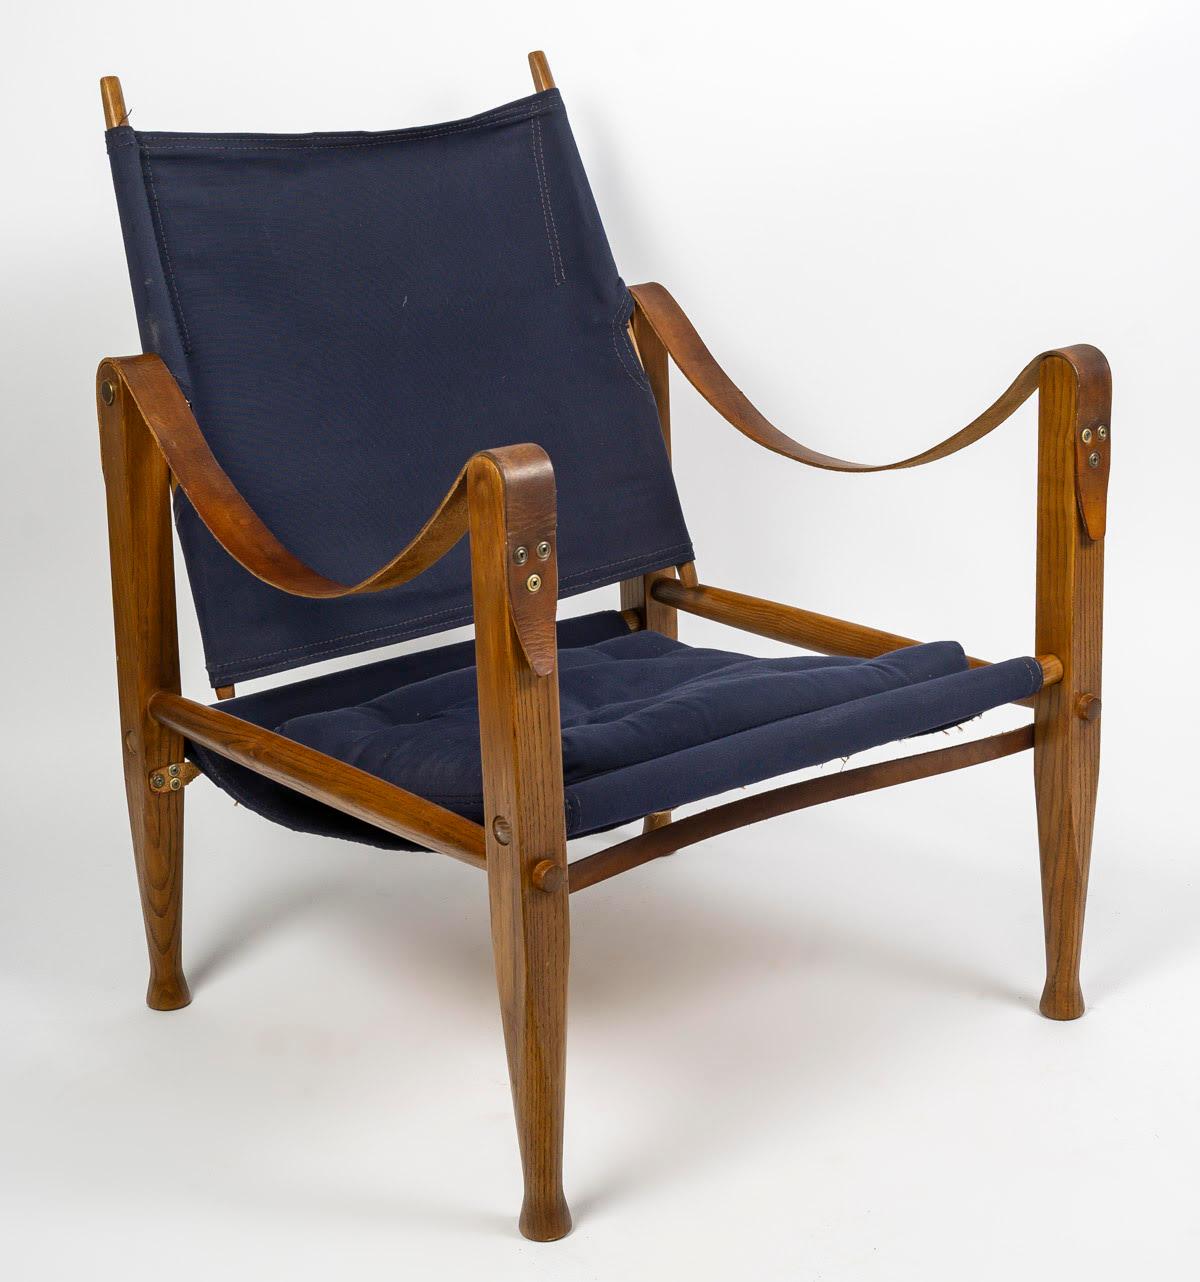 Pair of 1960s armchairs in oak, leather and canvas.

Pair of Safari armchairs in oak, leather and canvas from the 1960s.  
h: 77cm, w: 58cm, d: 61cm